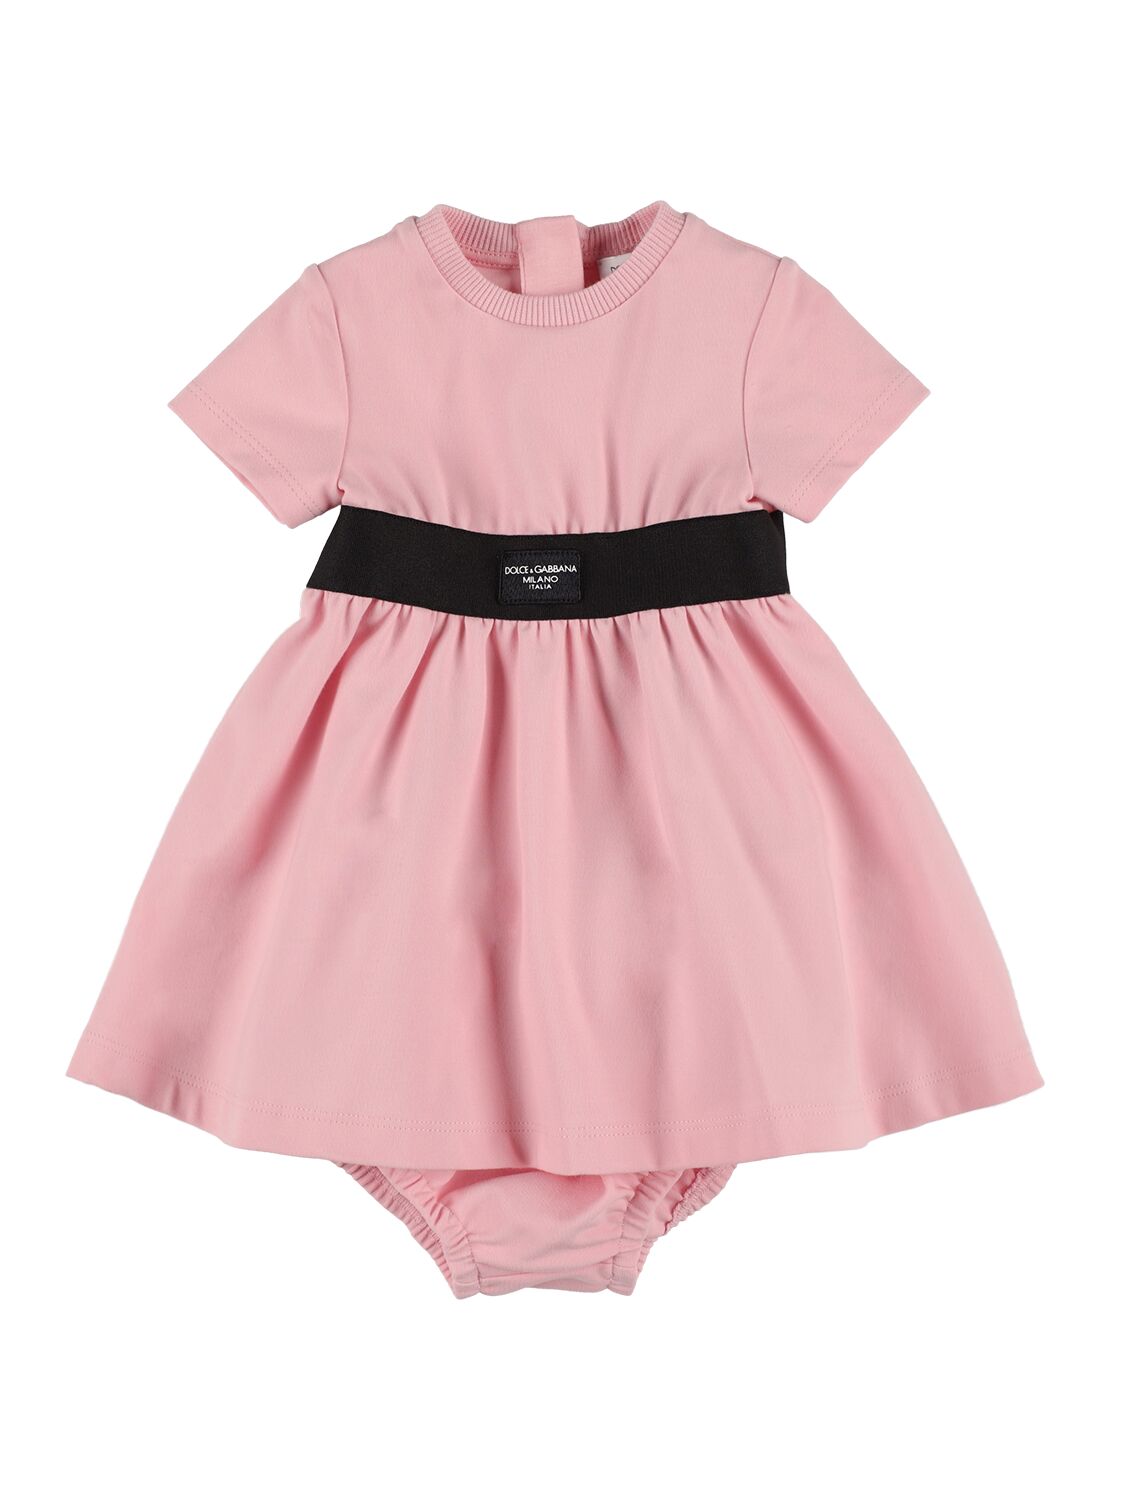 Dolce & Gabbana Babies' Printed Cotton Dress W/ Diaper Cover In Pink